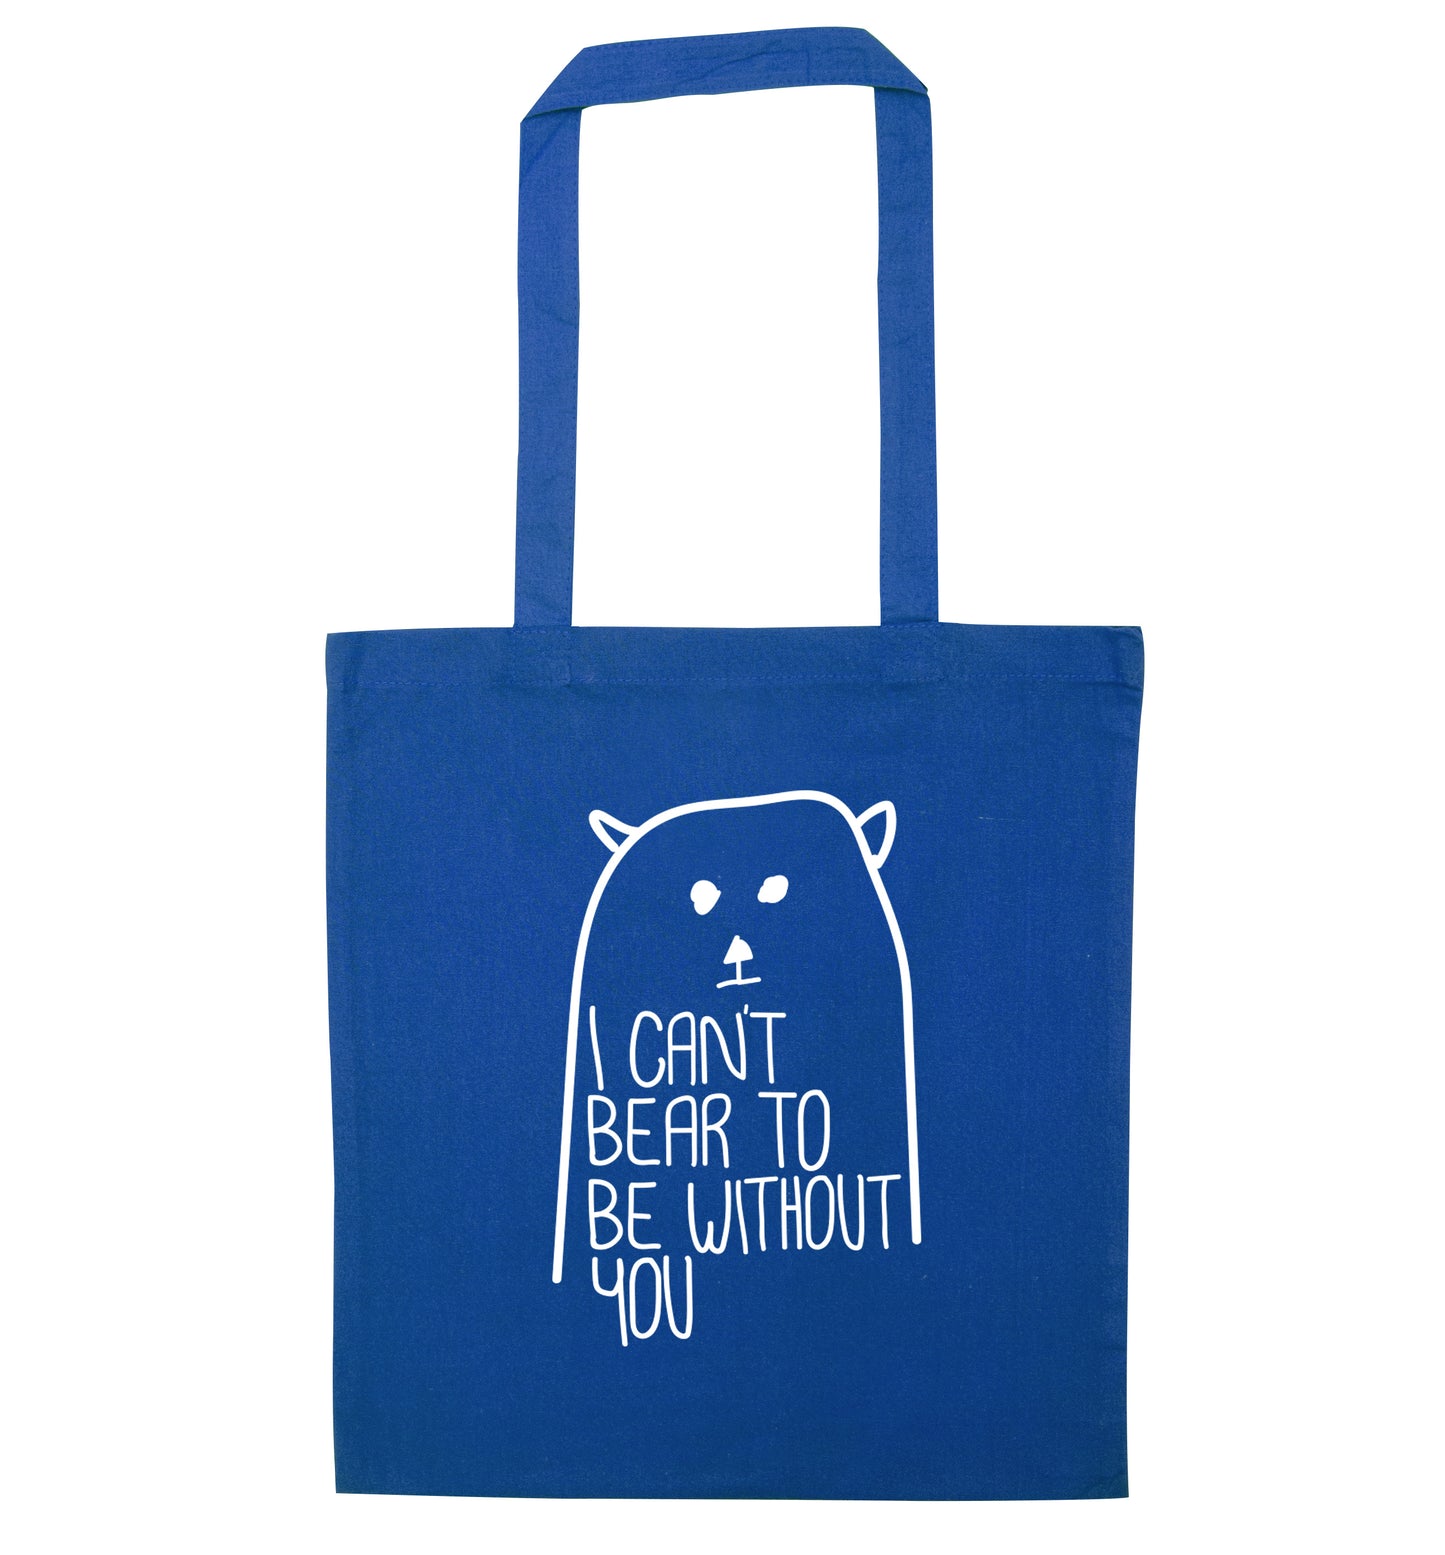 I can't bear to be without you blue tote bag